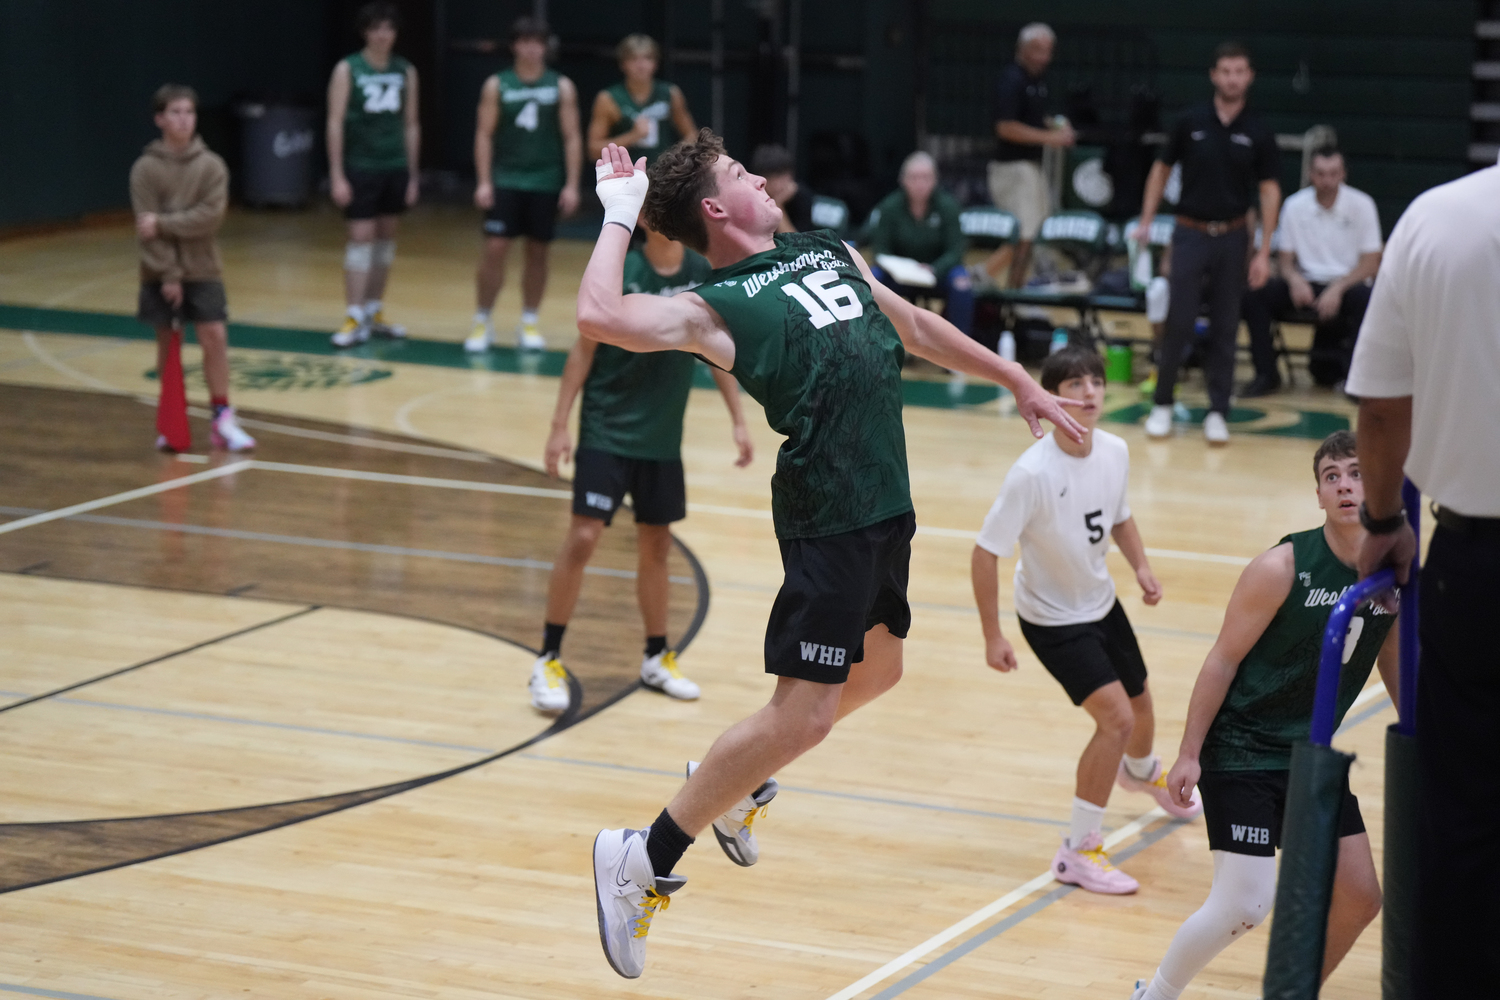 Senior outside hitter Will Jankowski leaps up to spike the ball. RON ESPOSITO